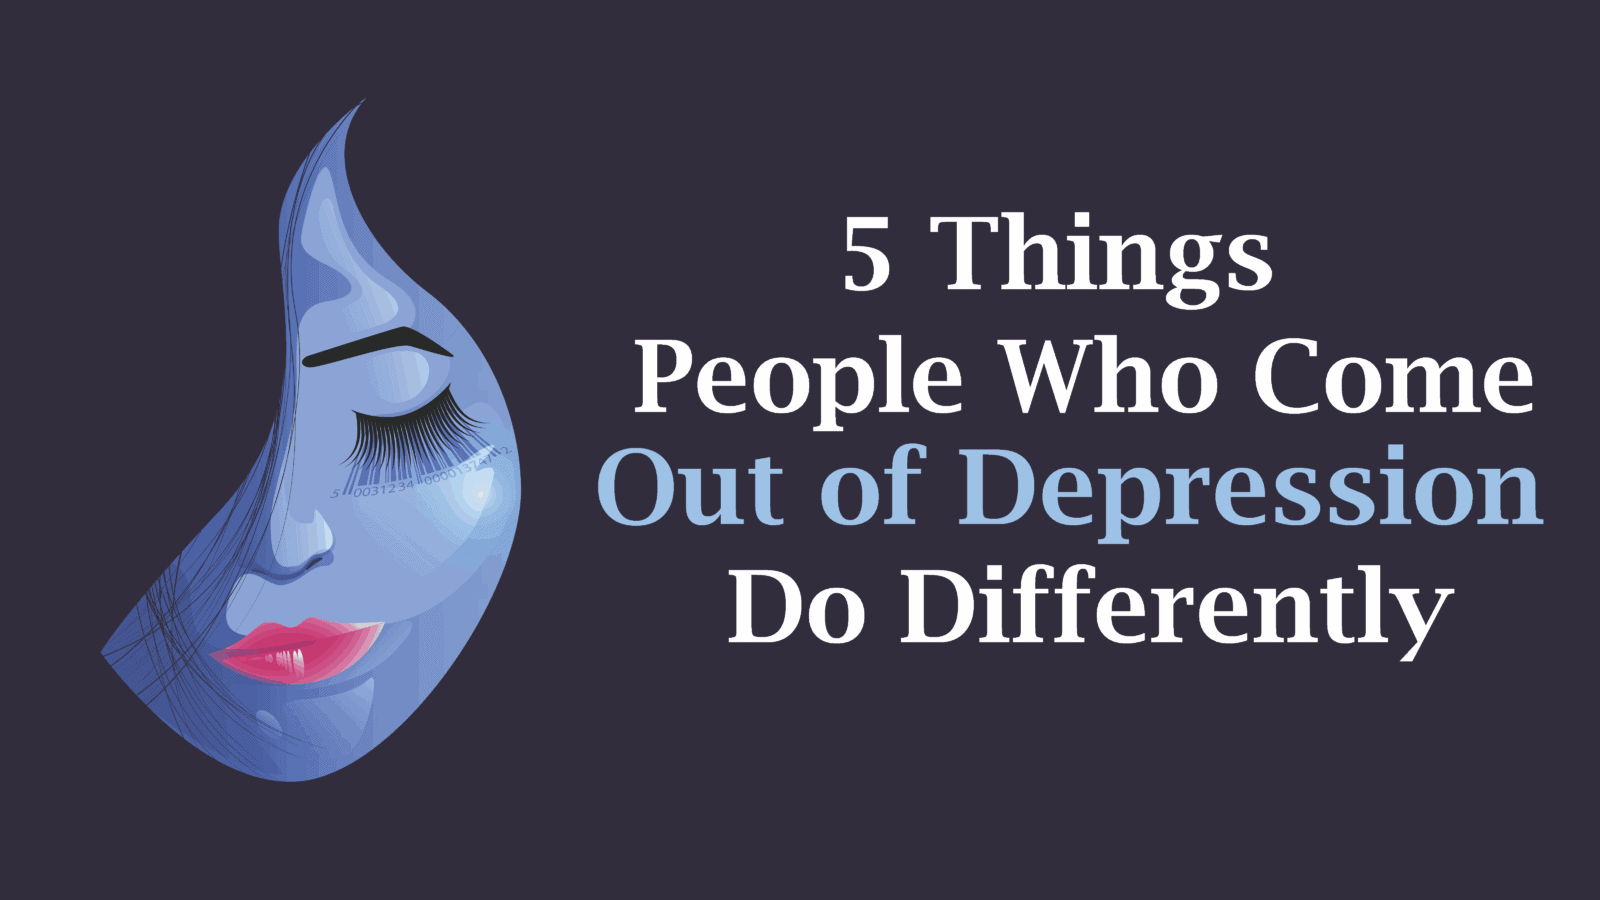 5 Things People Who Come Out of Depression Do Differently